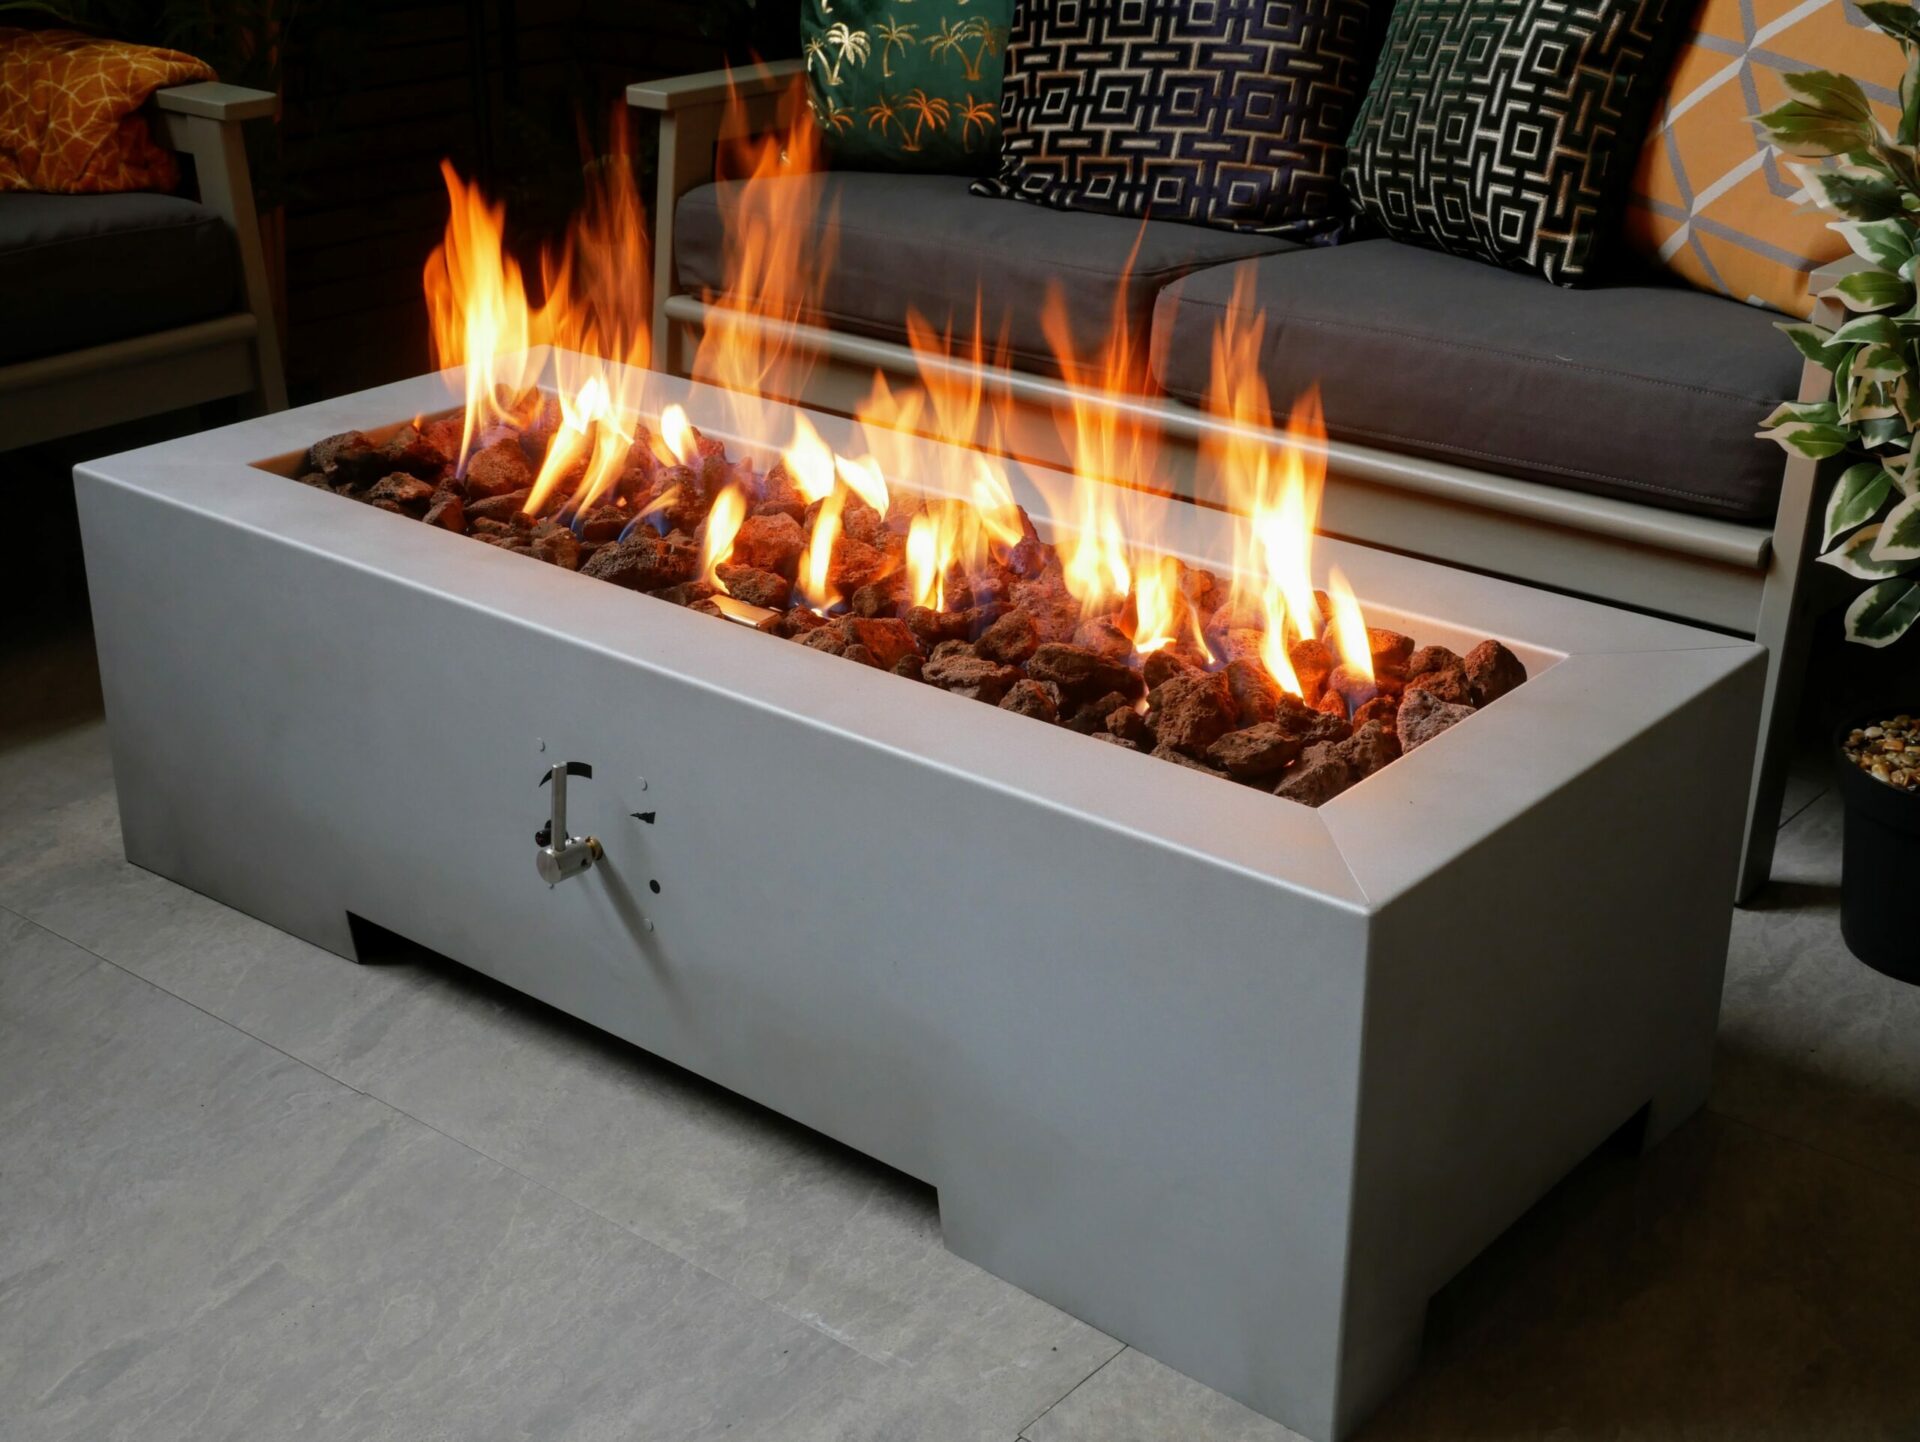 How To Turn On A Gas Fire Pit | Storables